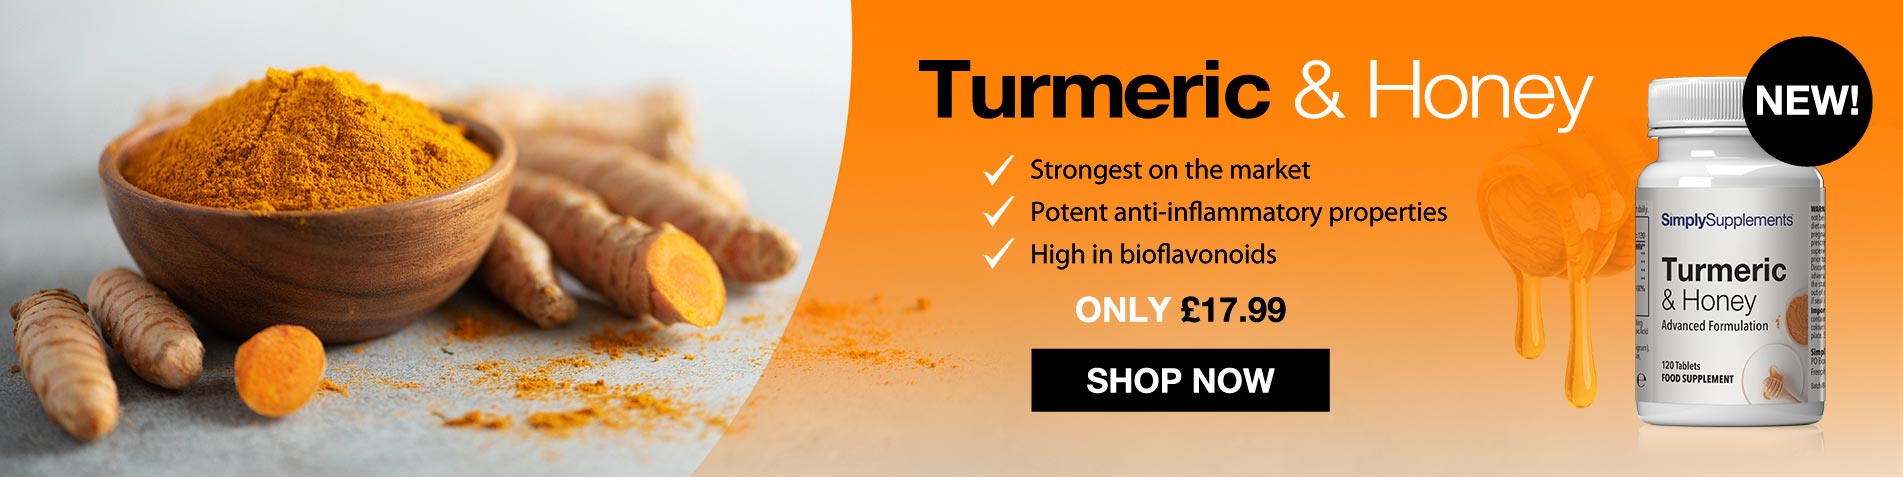 NEW: Turmeric and Honey Supplement. SHOP NOW